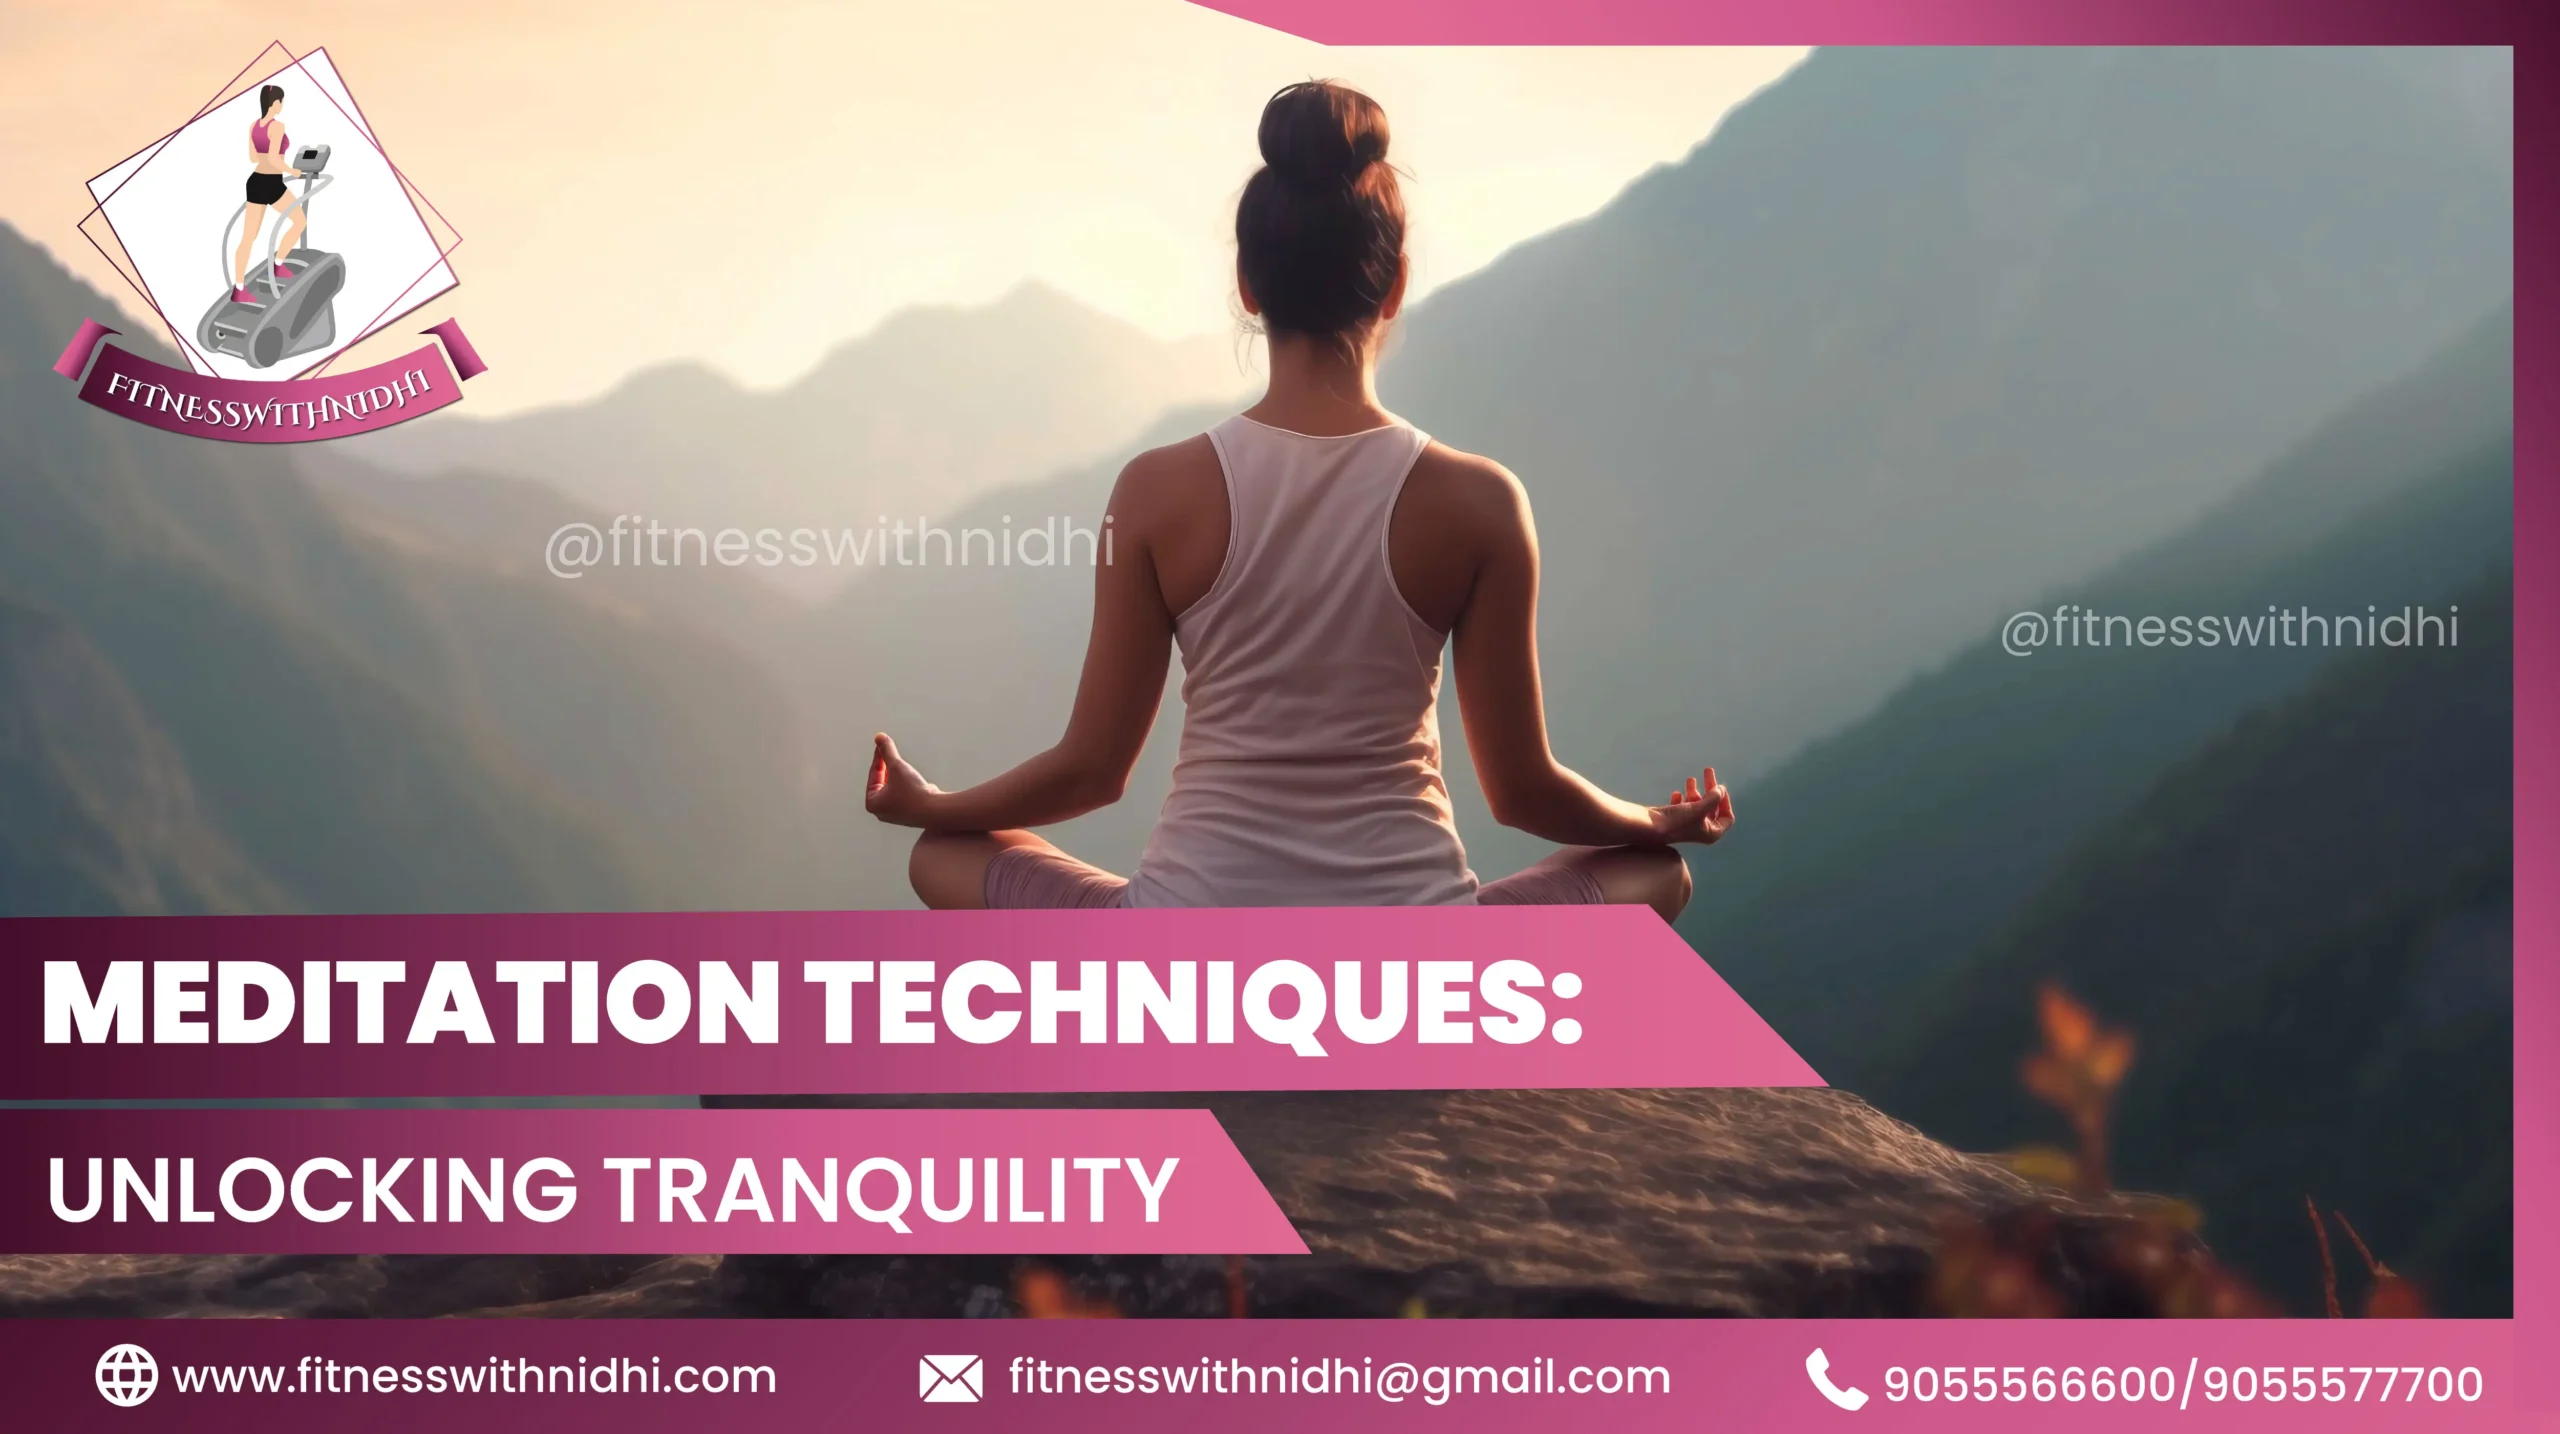 11types of meditation techniques to practice